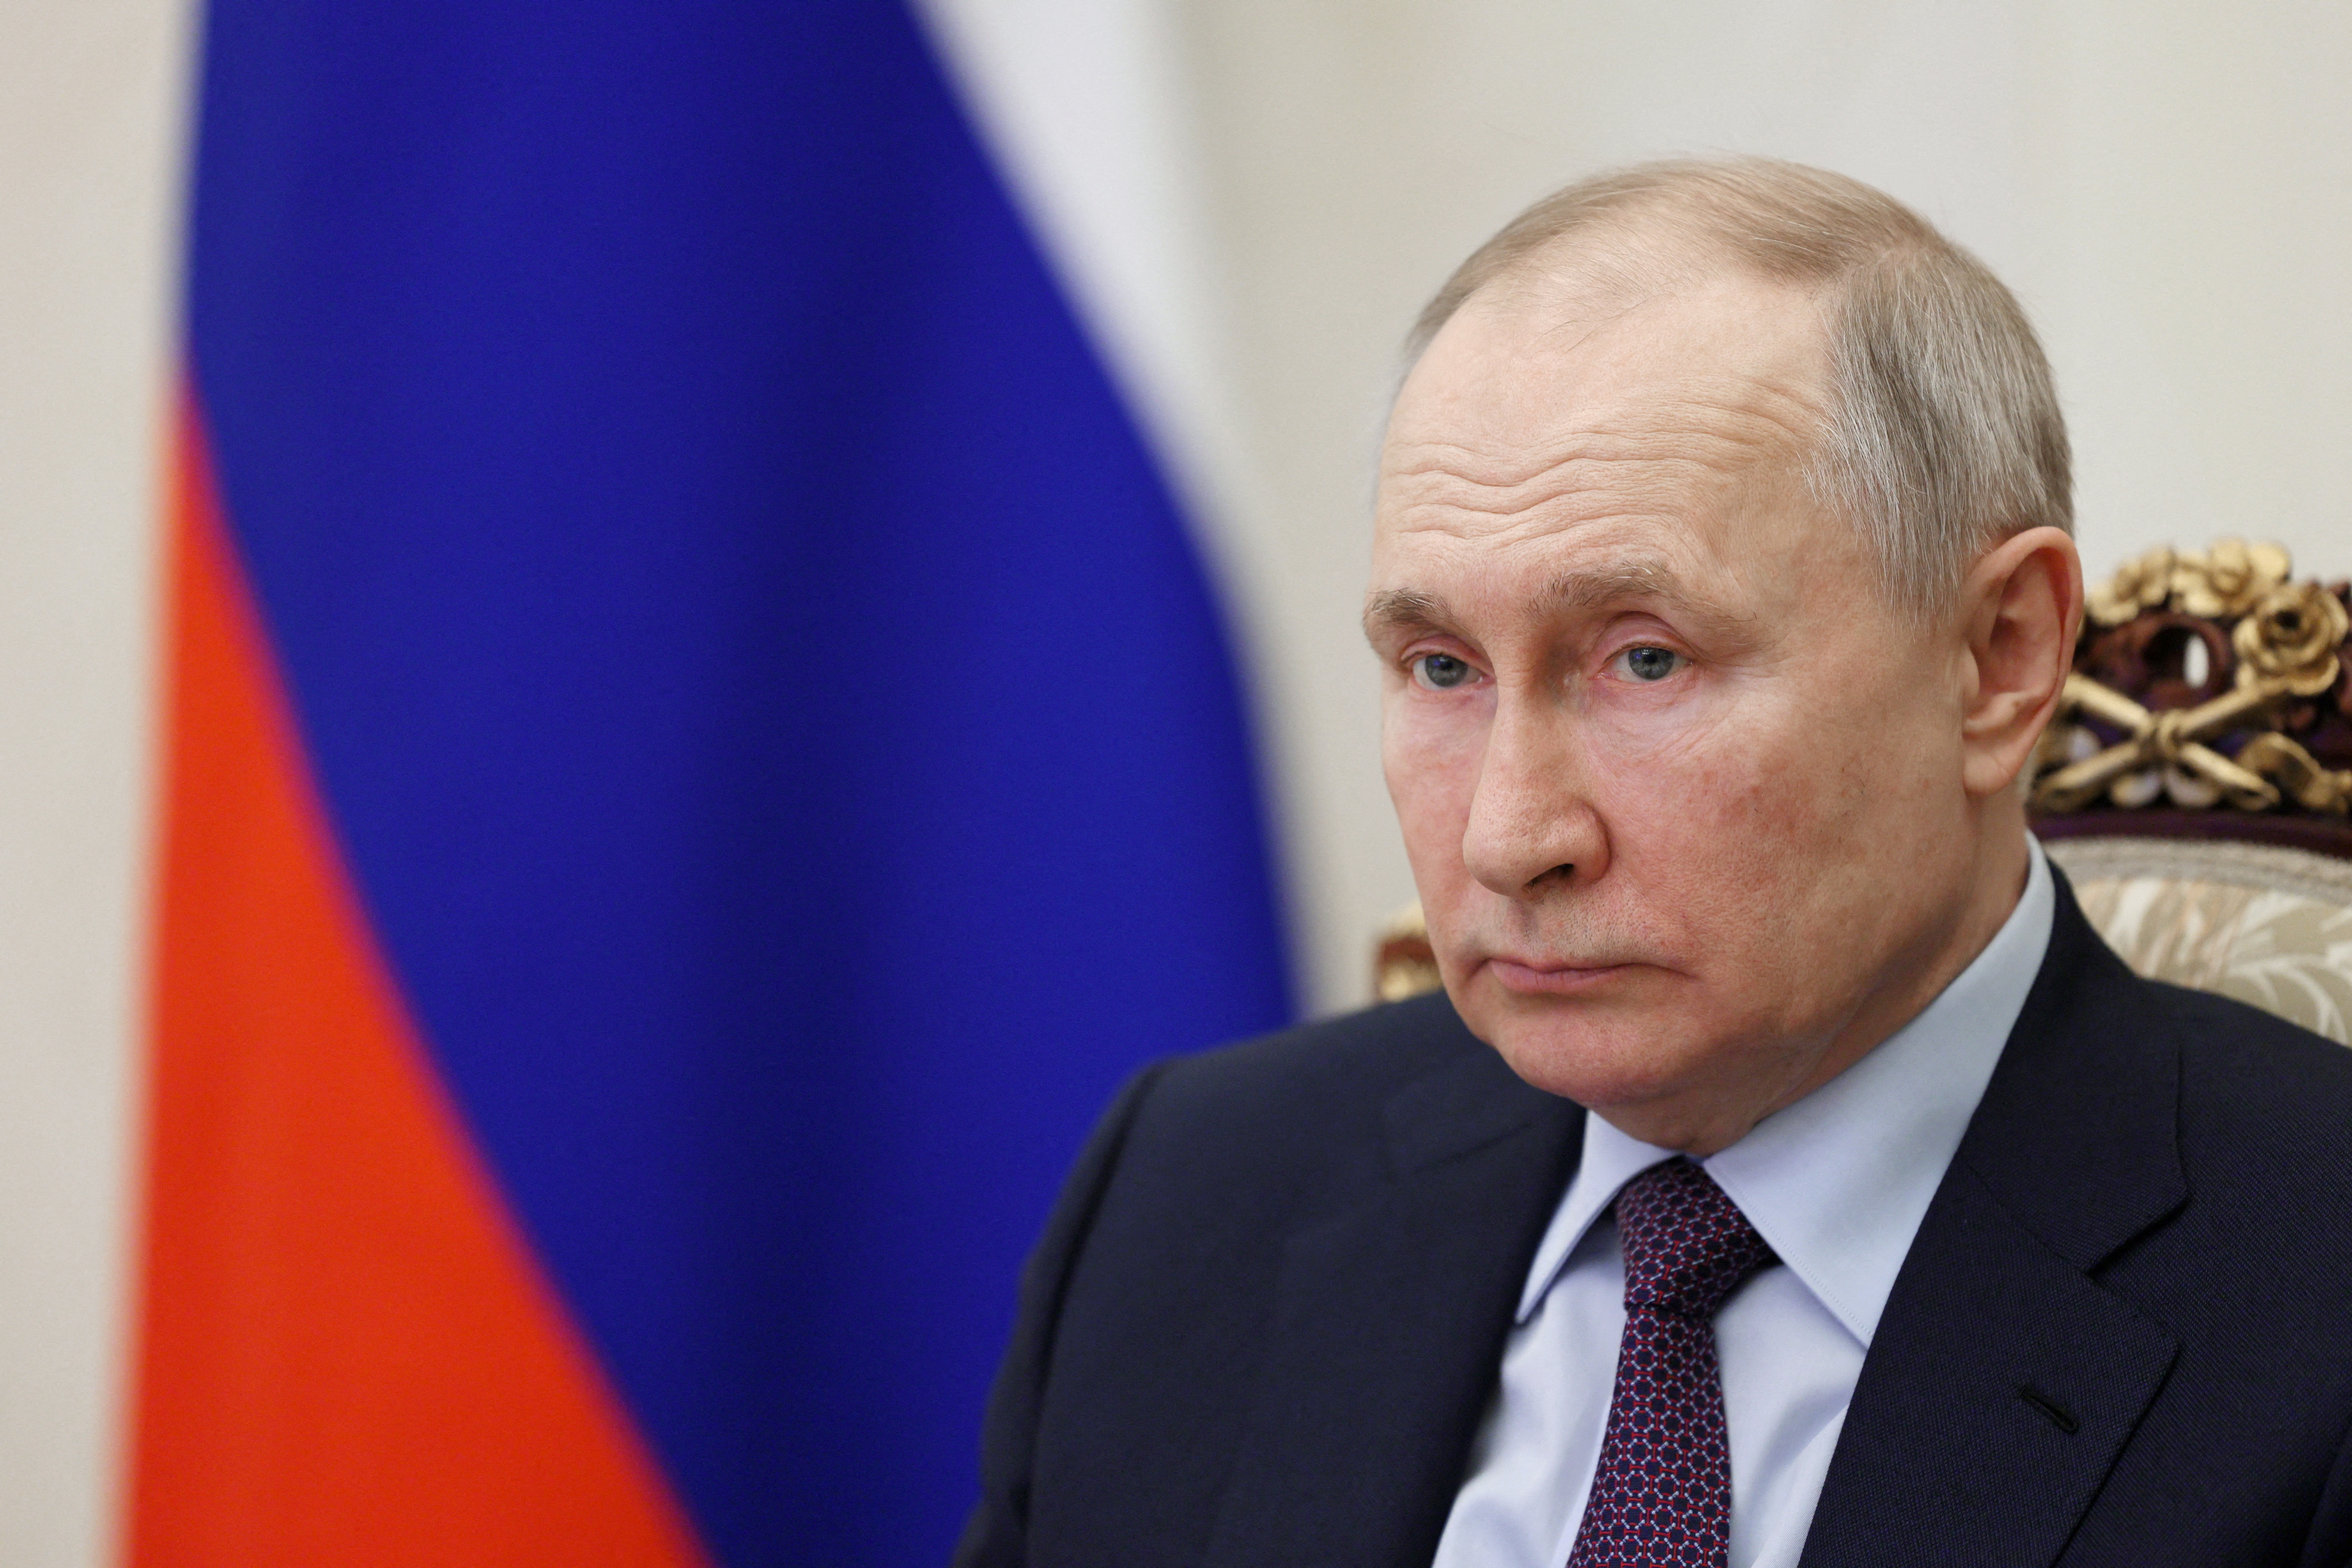 Russian President Putin attends a ceremony via video link at the Kremlin in Moscow